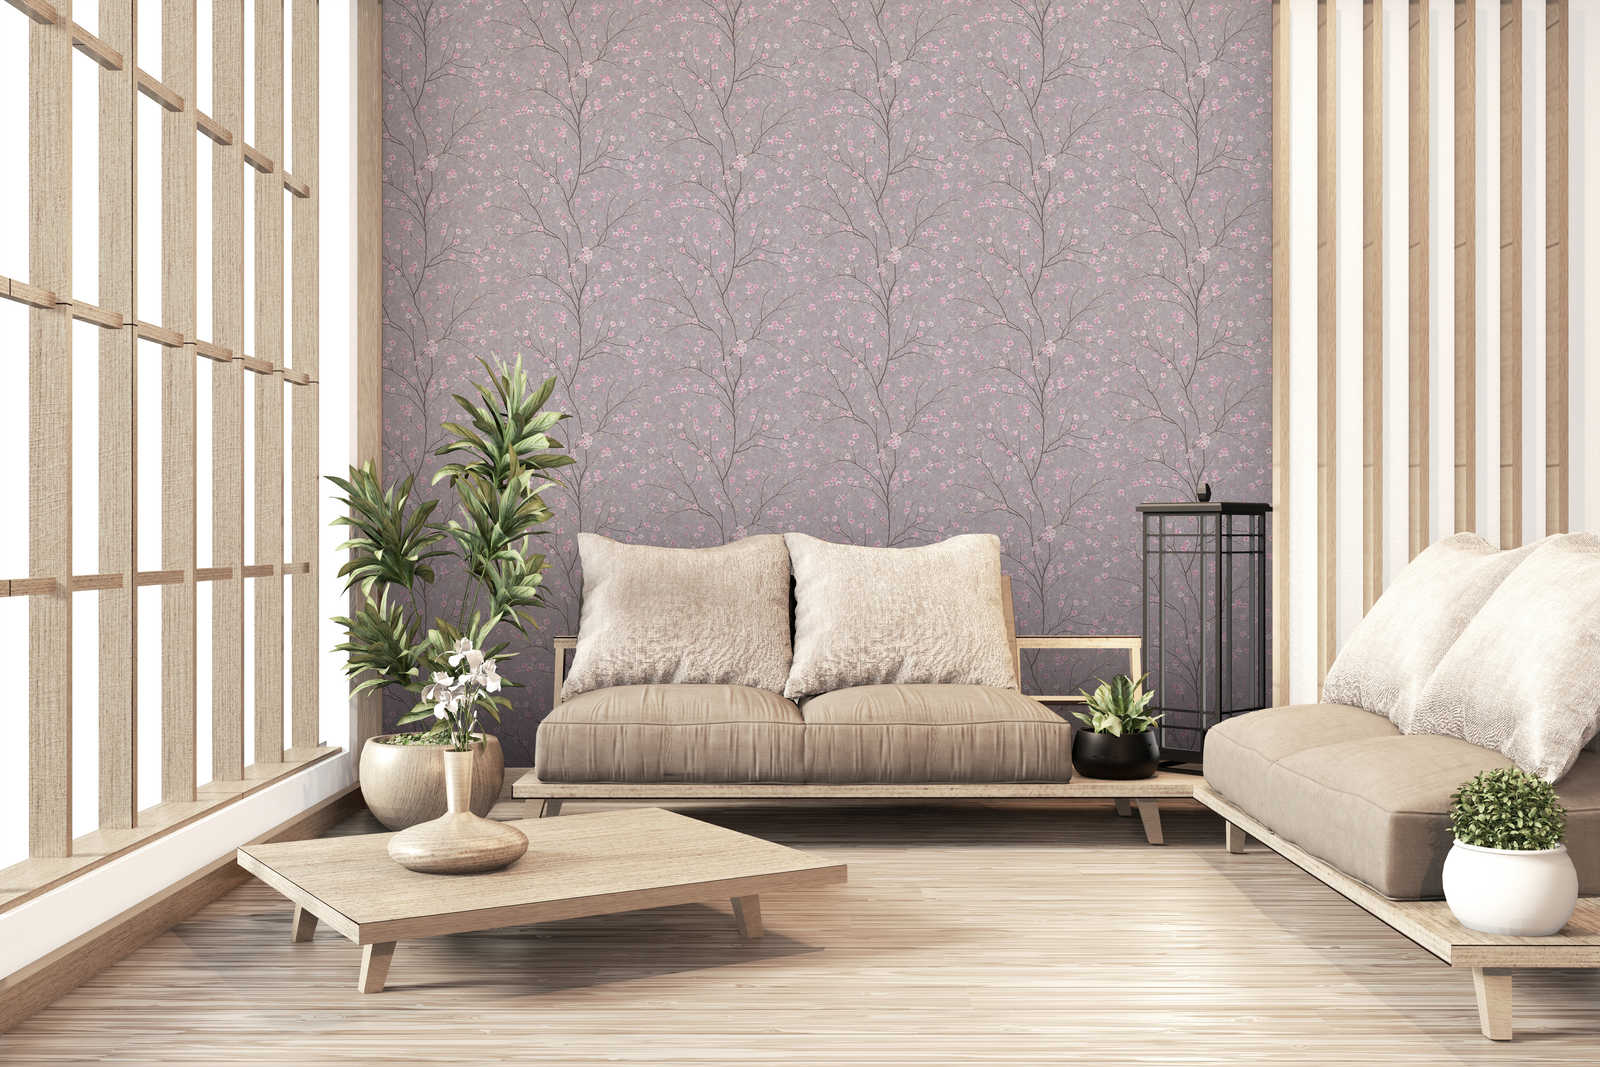             Asian style wallpaper with cherry blossom pattern - grey, pink
        